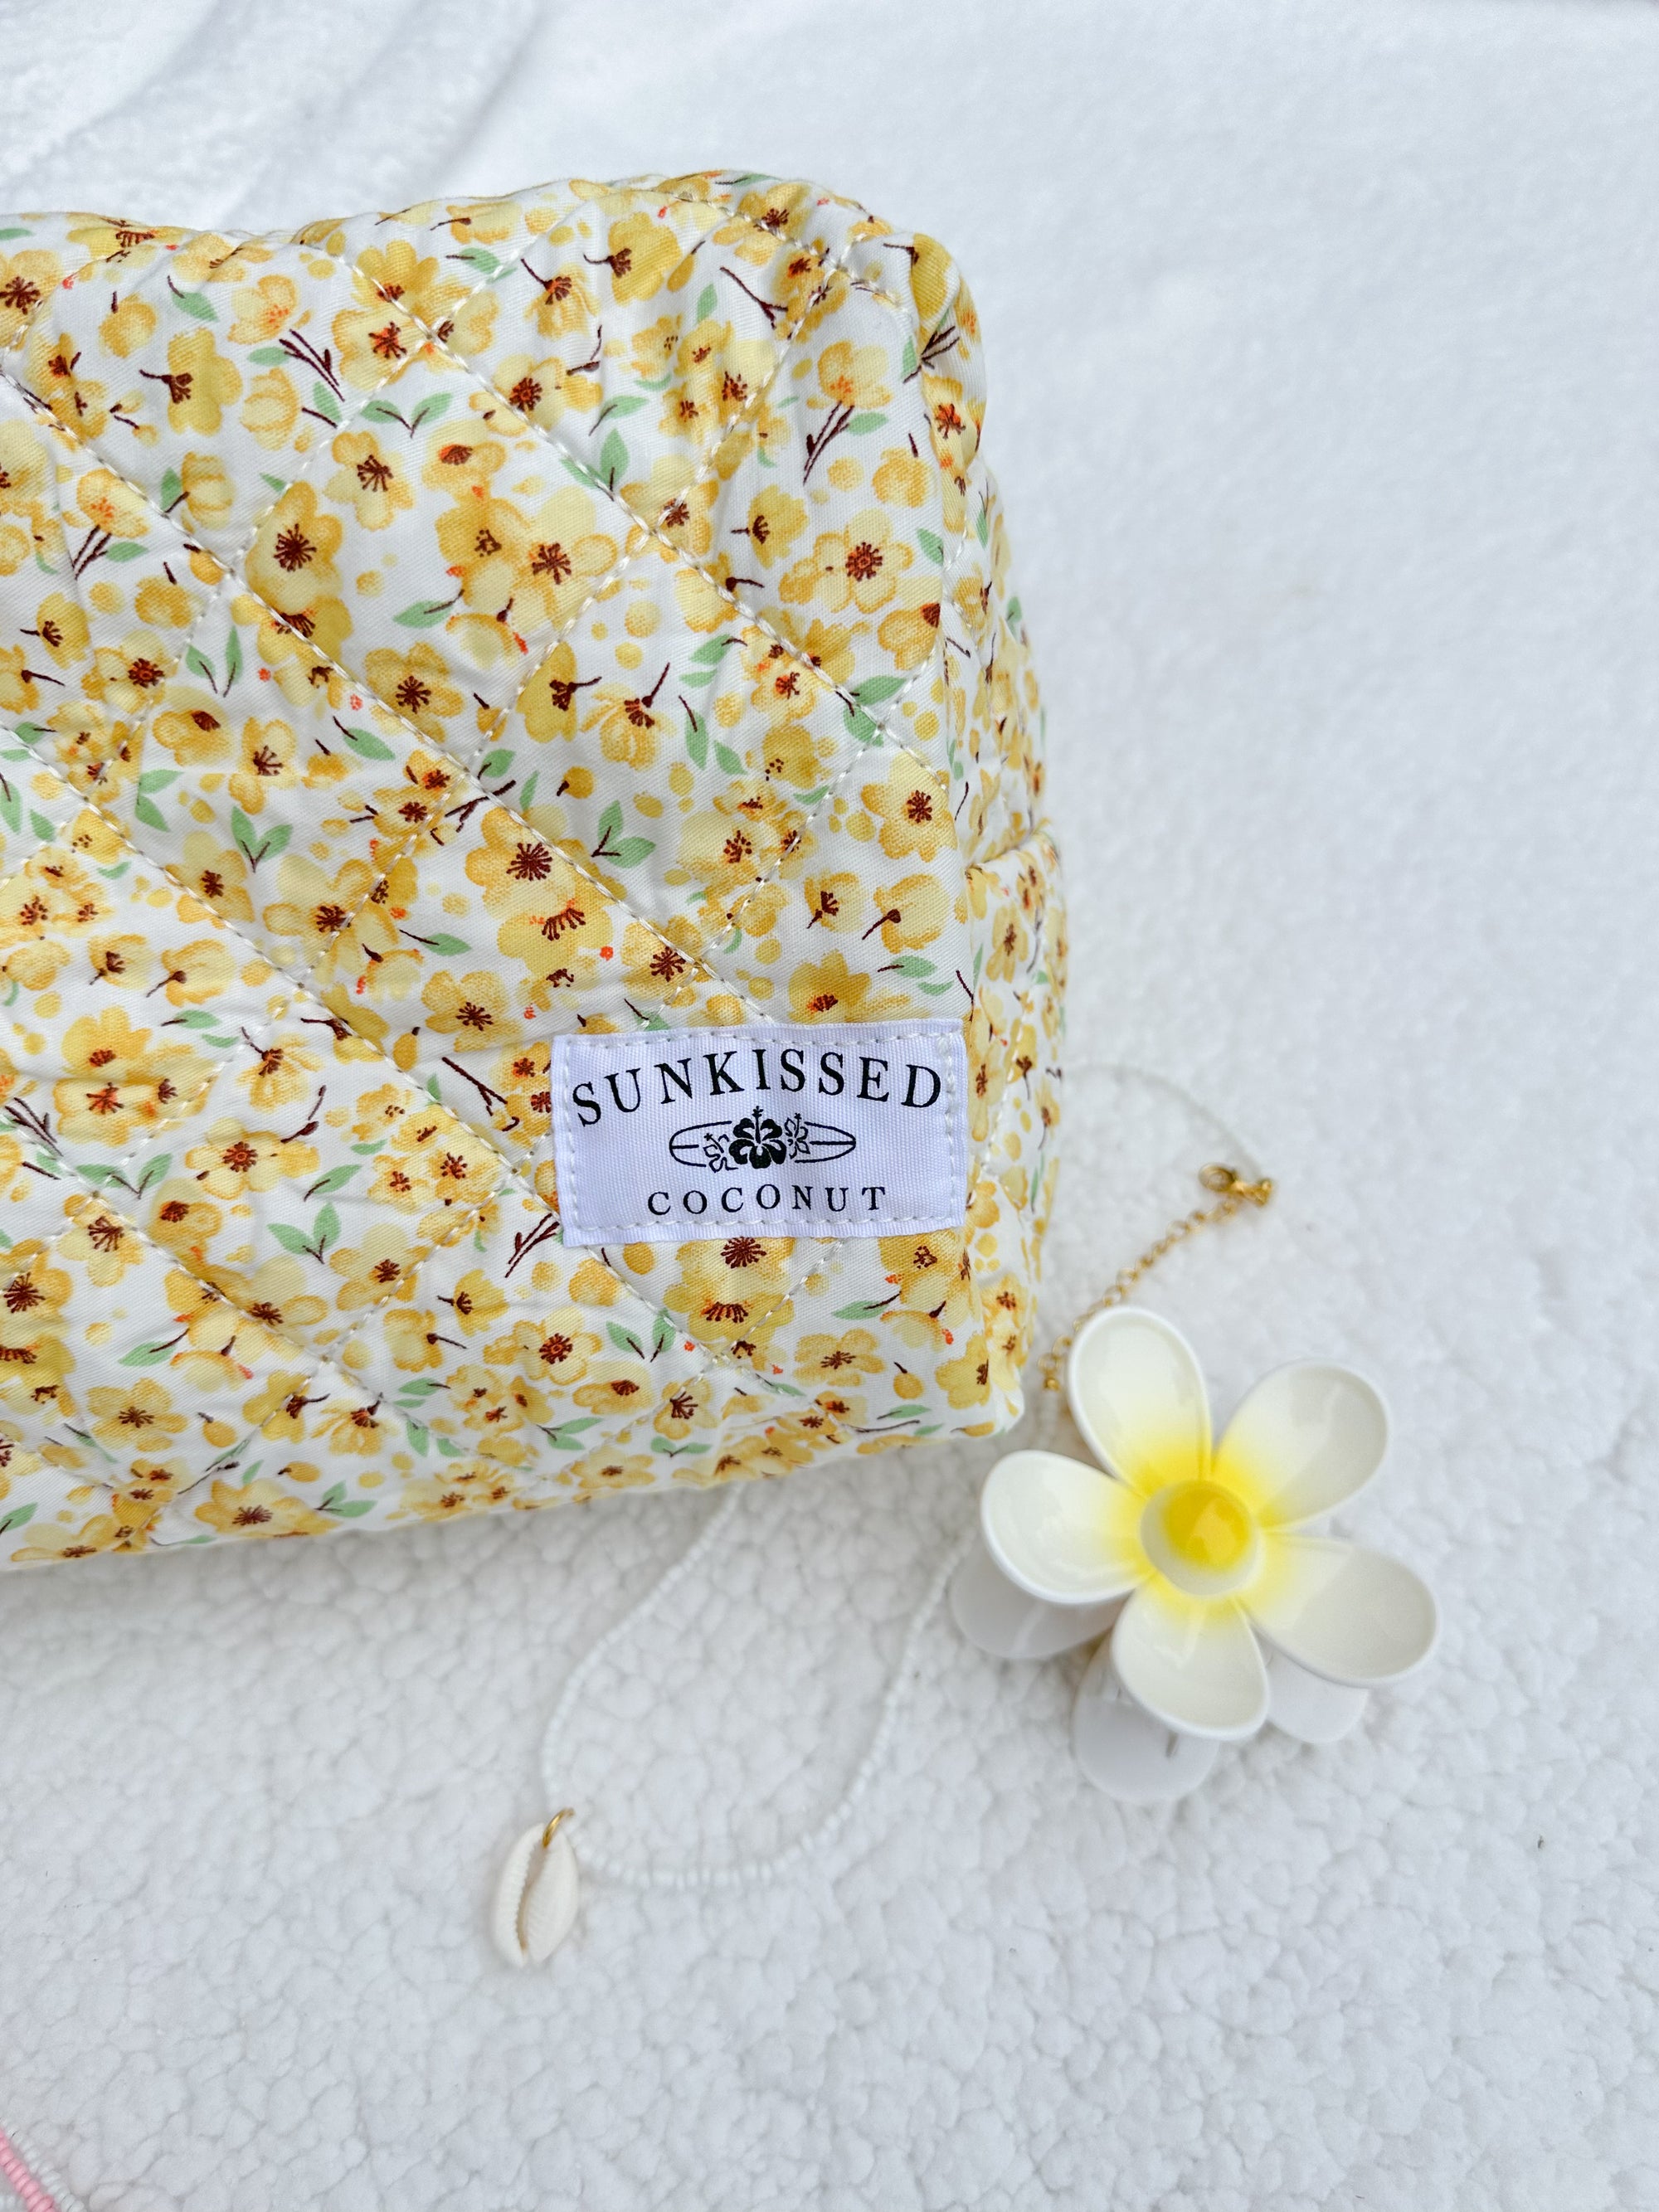 Yellow Flower Quilted Handmade Makeup Bag